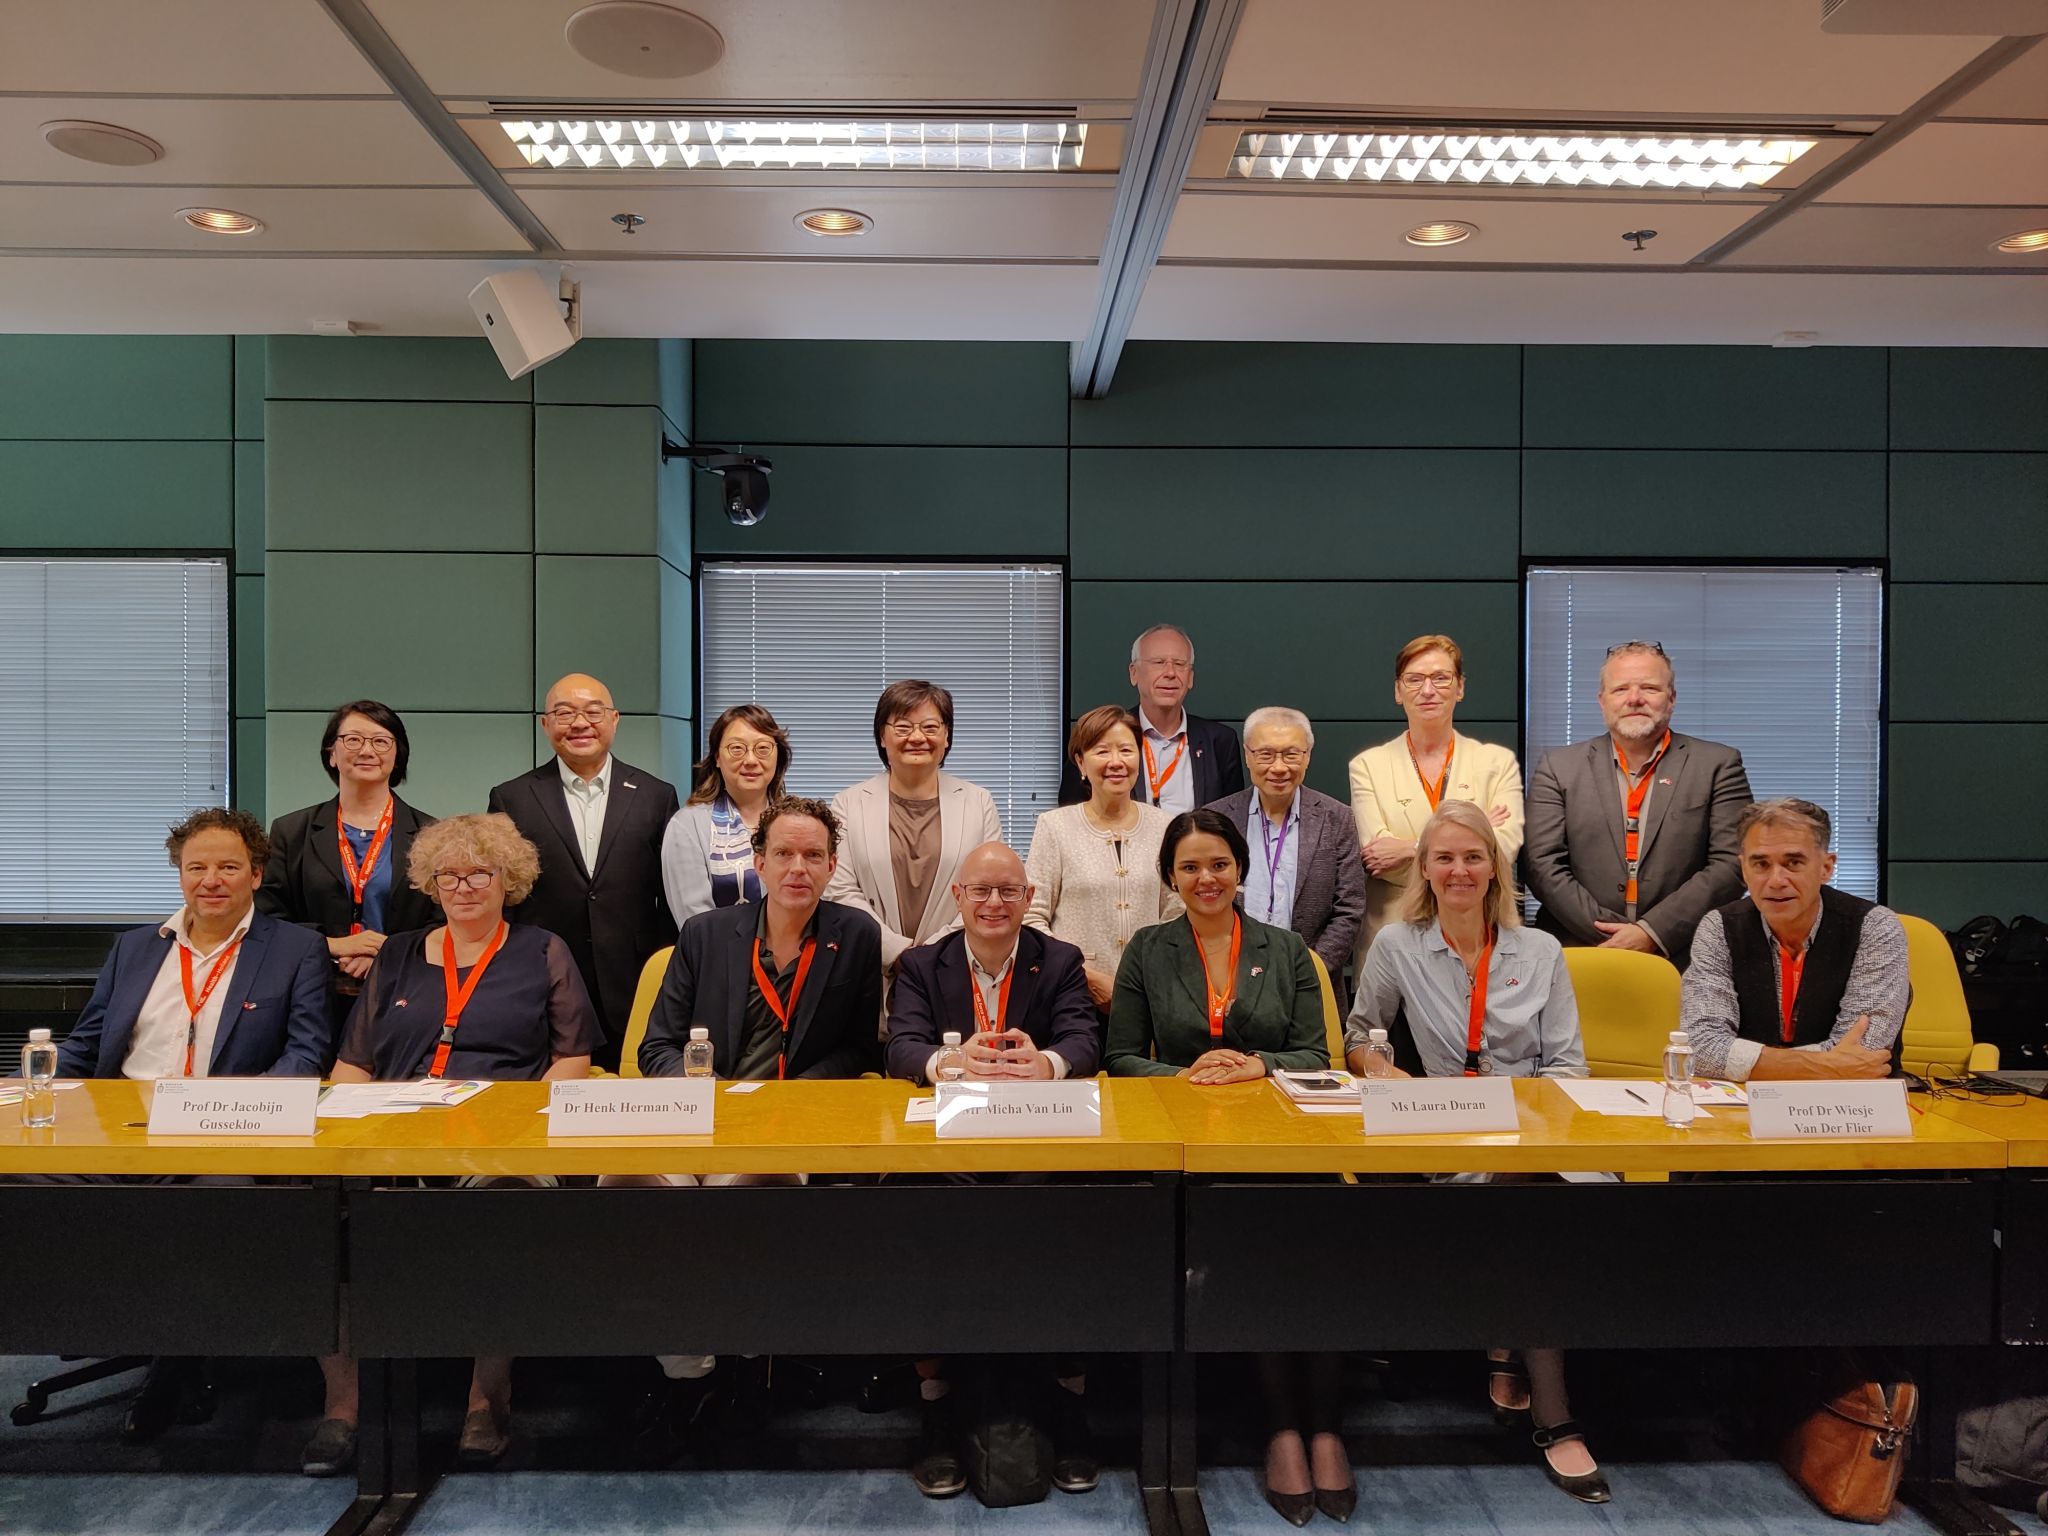 HKUST President Prof. Nancy IP and her research team from the Hong Kong Center for Neurodegenerative Diseases (HKCeND), and the head of the Knowledge Transfer Office (Biomedical and Healthcare) met with the delegation from The Netherlands.